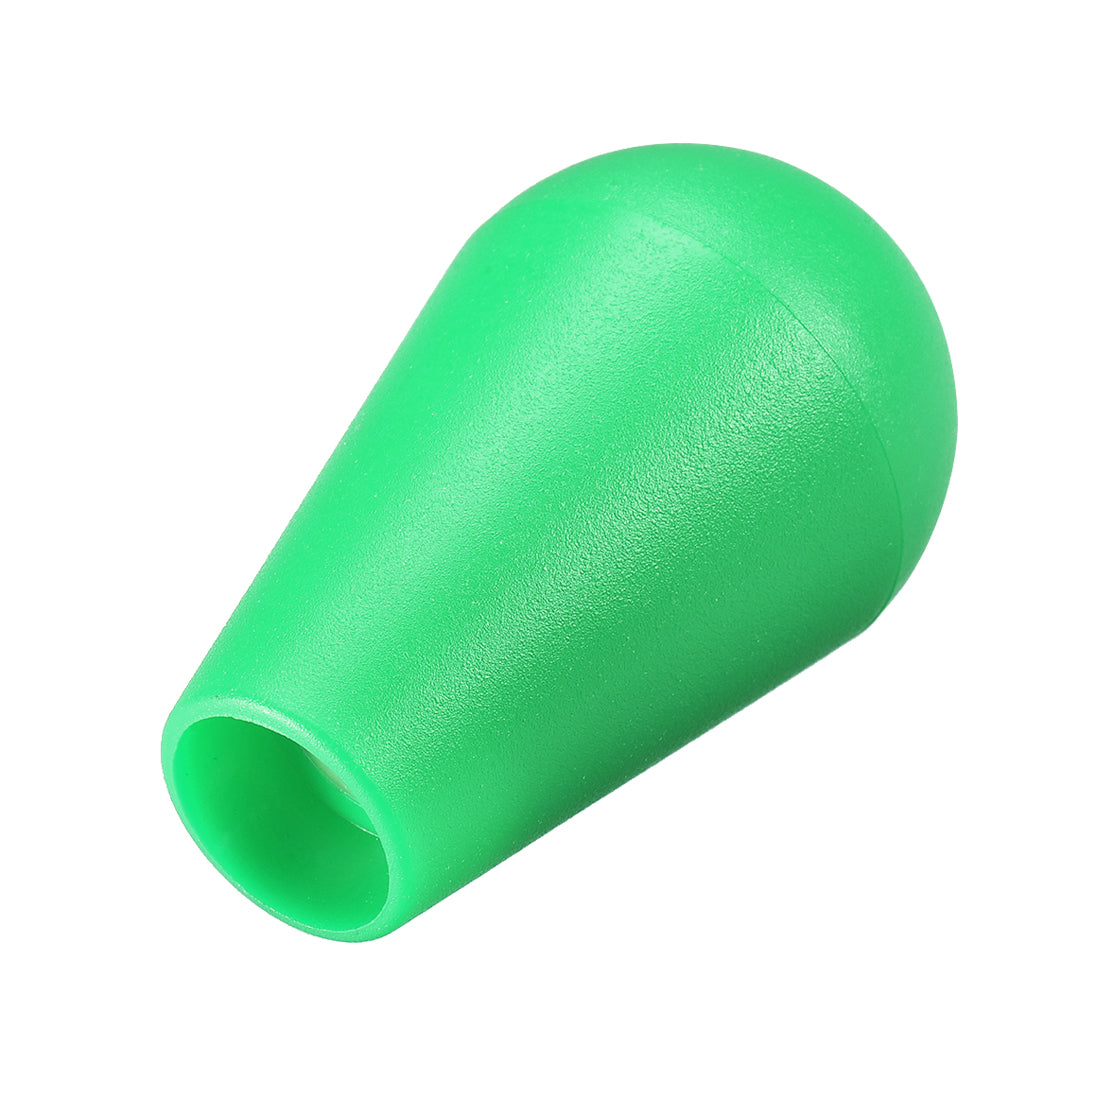 uxcell Uxcell Ellipse Oval Joystick Head Rocker Ball Top Handle American Type Arcade Game DIY Parts Replacement Green 2Pcs